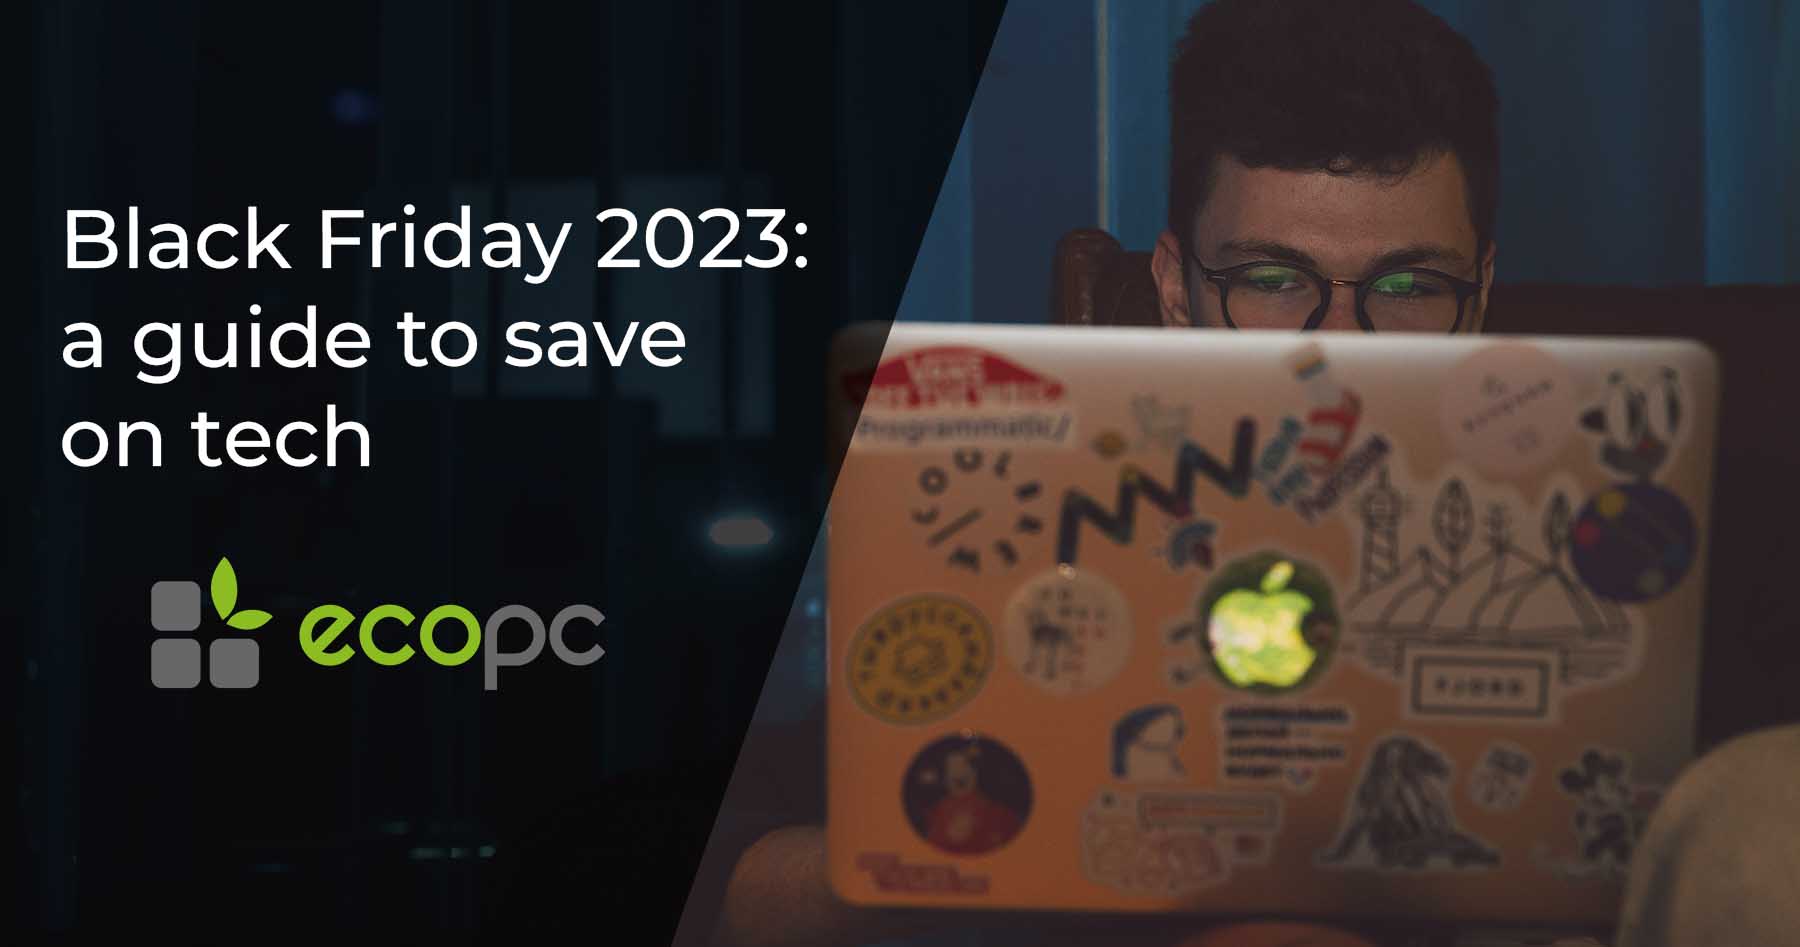 Black Friday 2023: a guide to save on tech